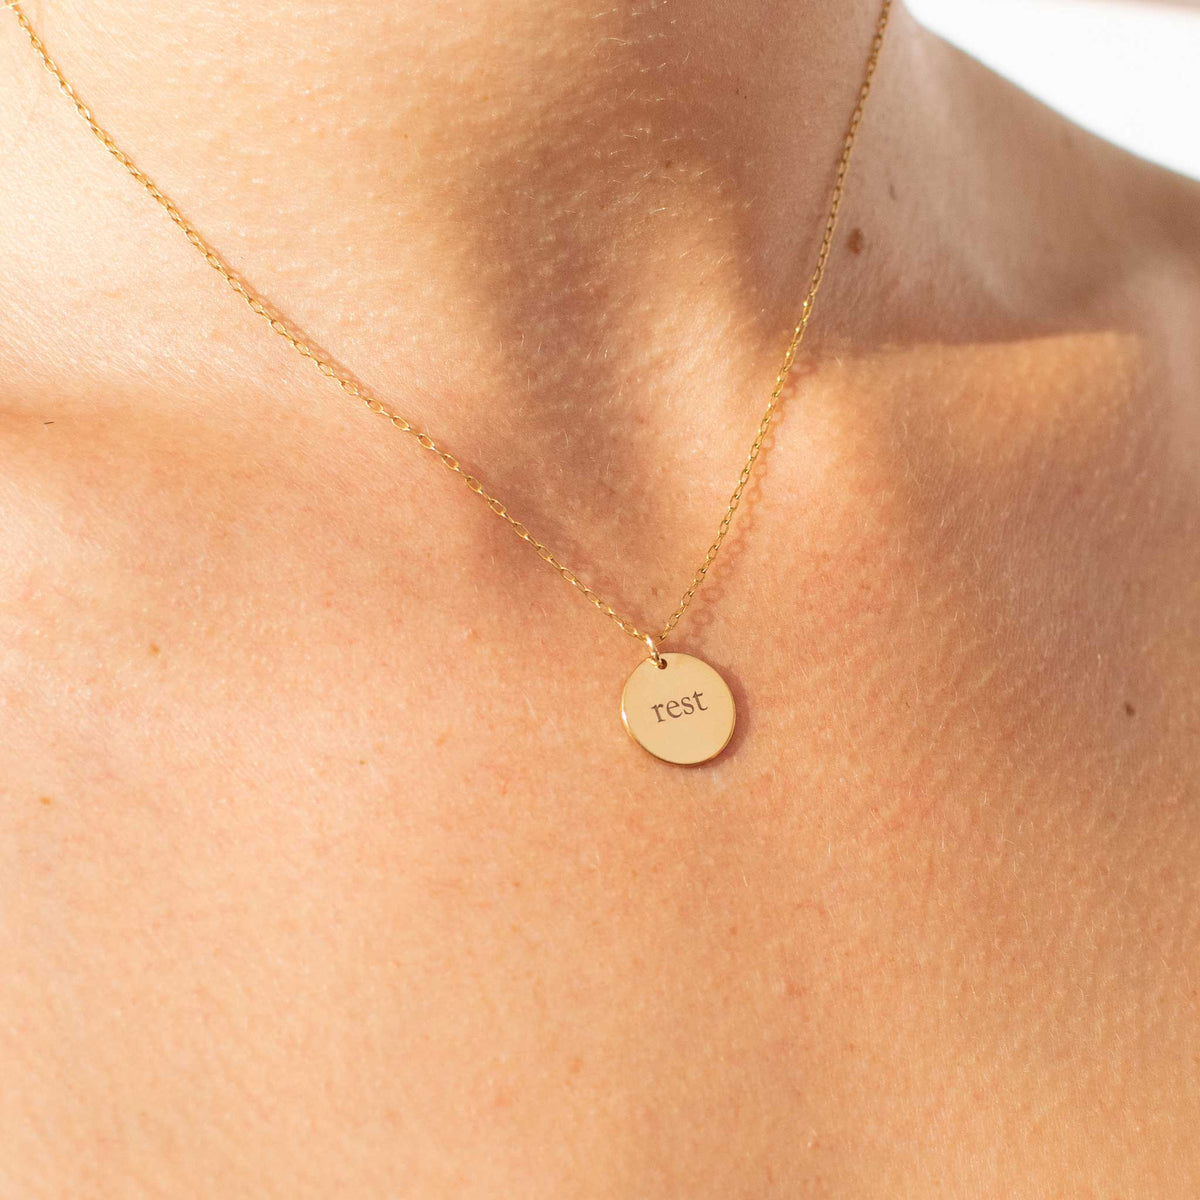 a very close up of the gold 13mm circle pendant with rest engraved using the ol&#39; serif font. Image is focused on just necklace with only a small part of neck and chest showing.